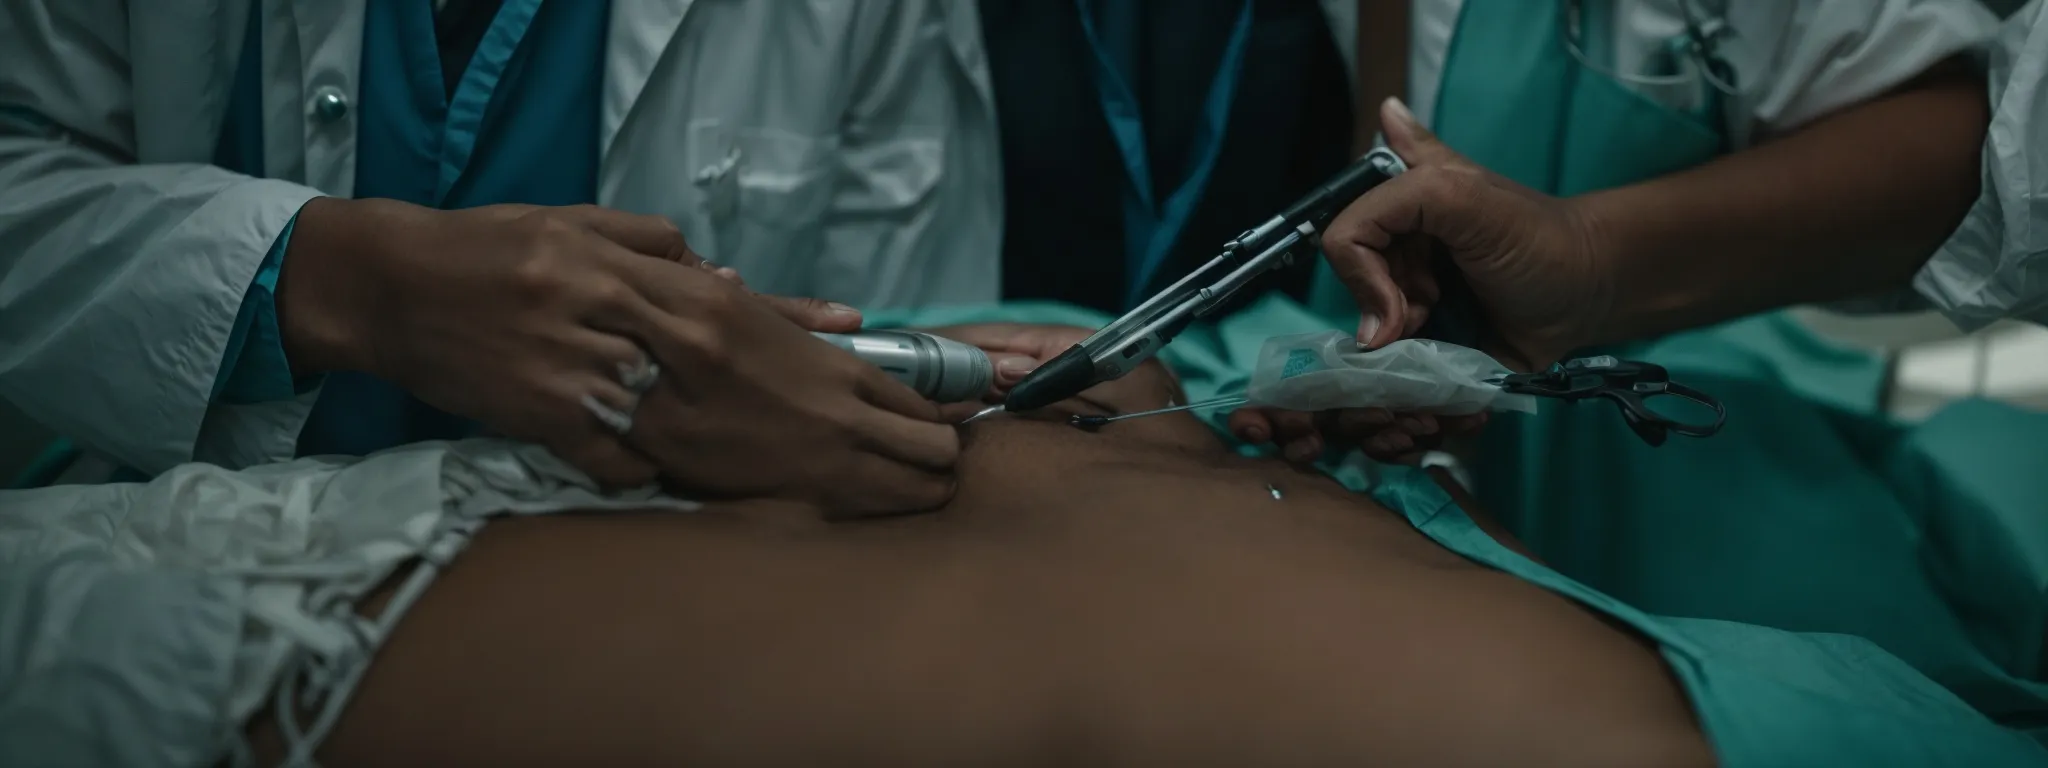 a surgeon performing a delicate operation, with a close-up on the precise tools and surgical procedure.